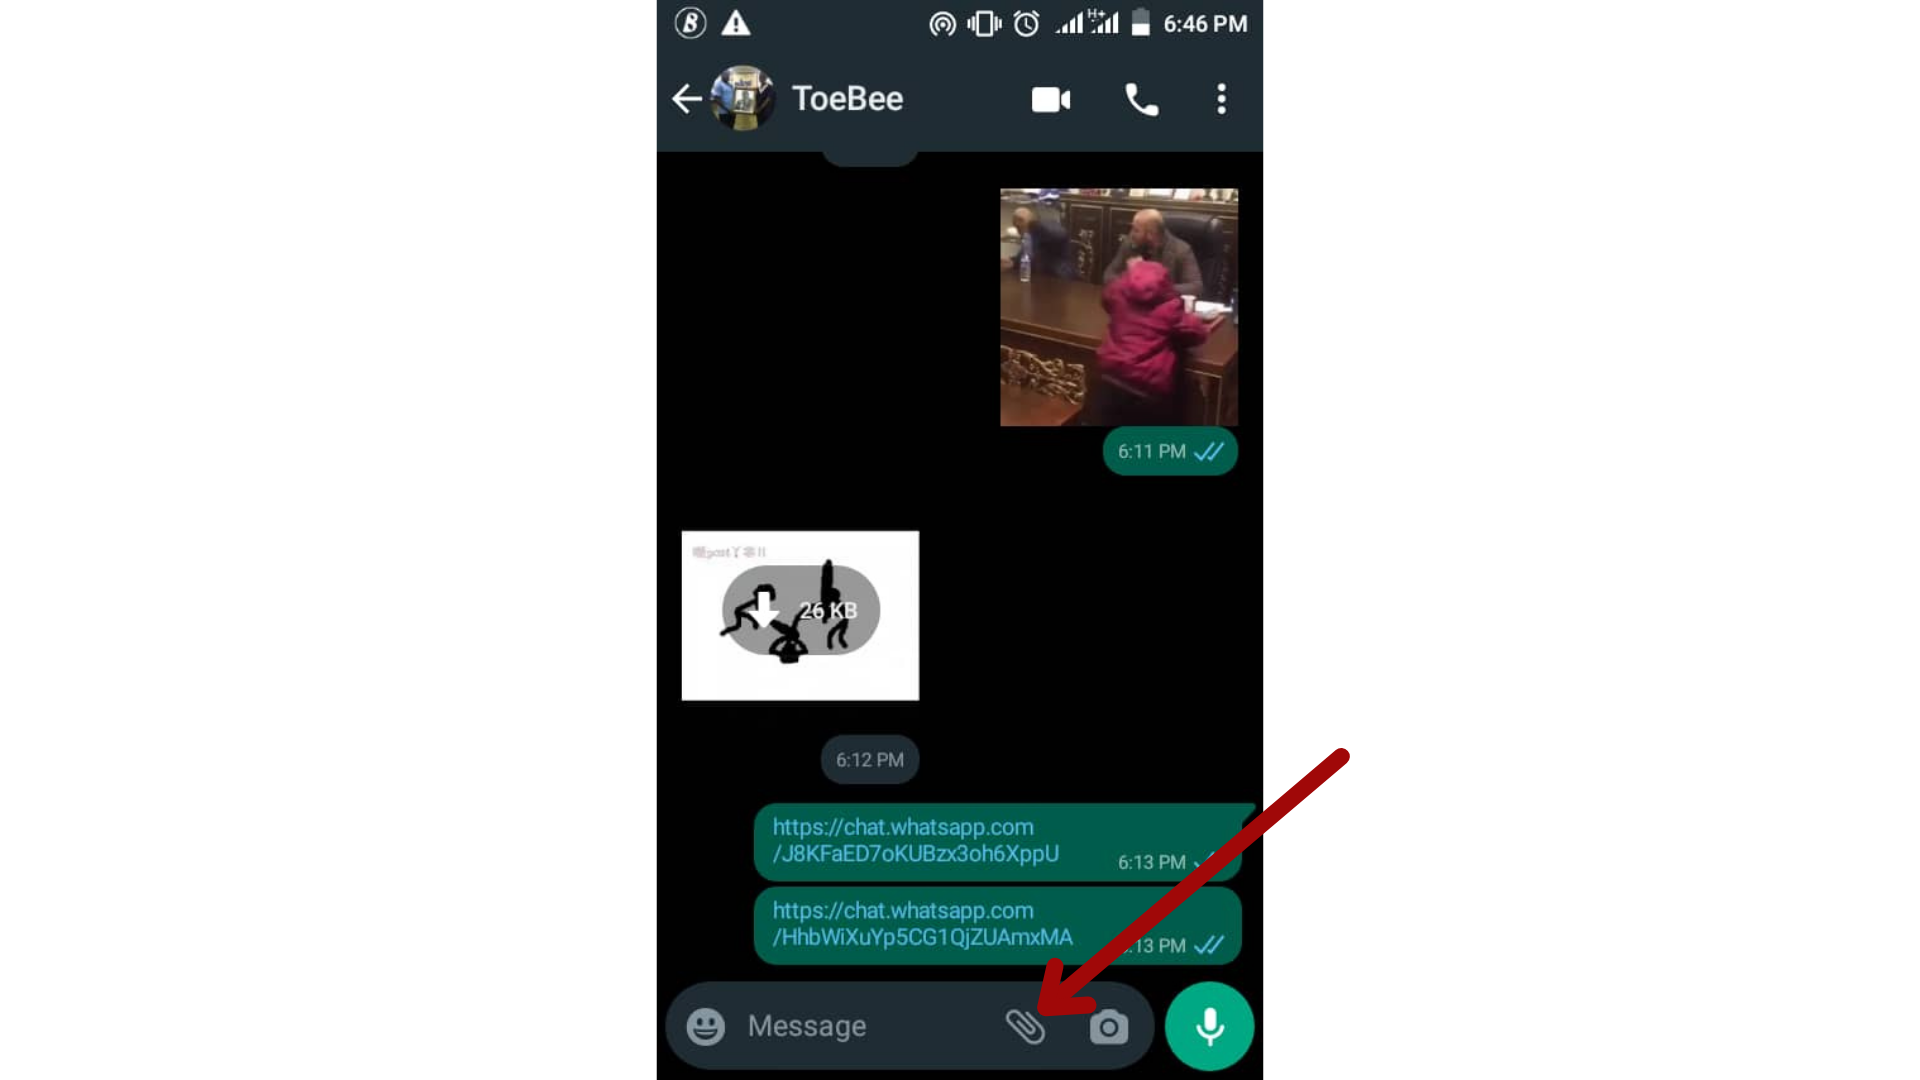 Share files as Document on Whatsapp Android